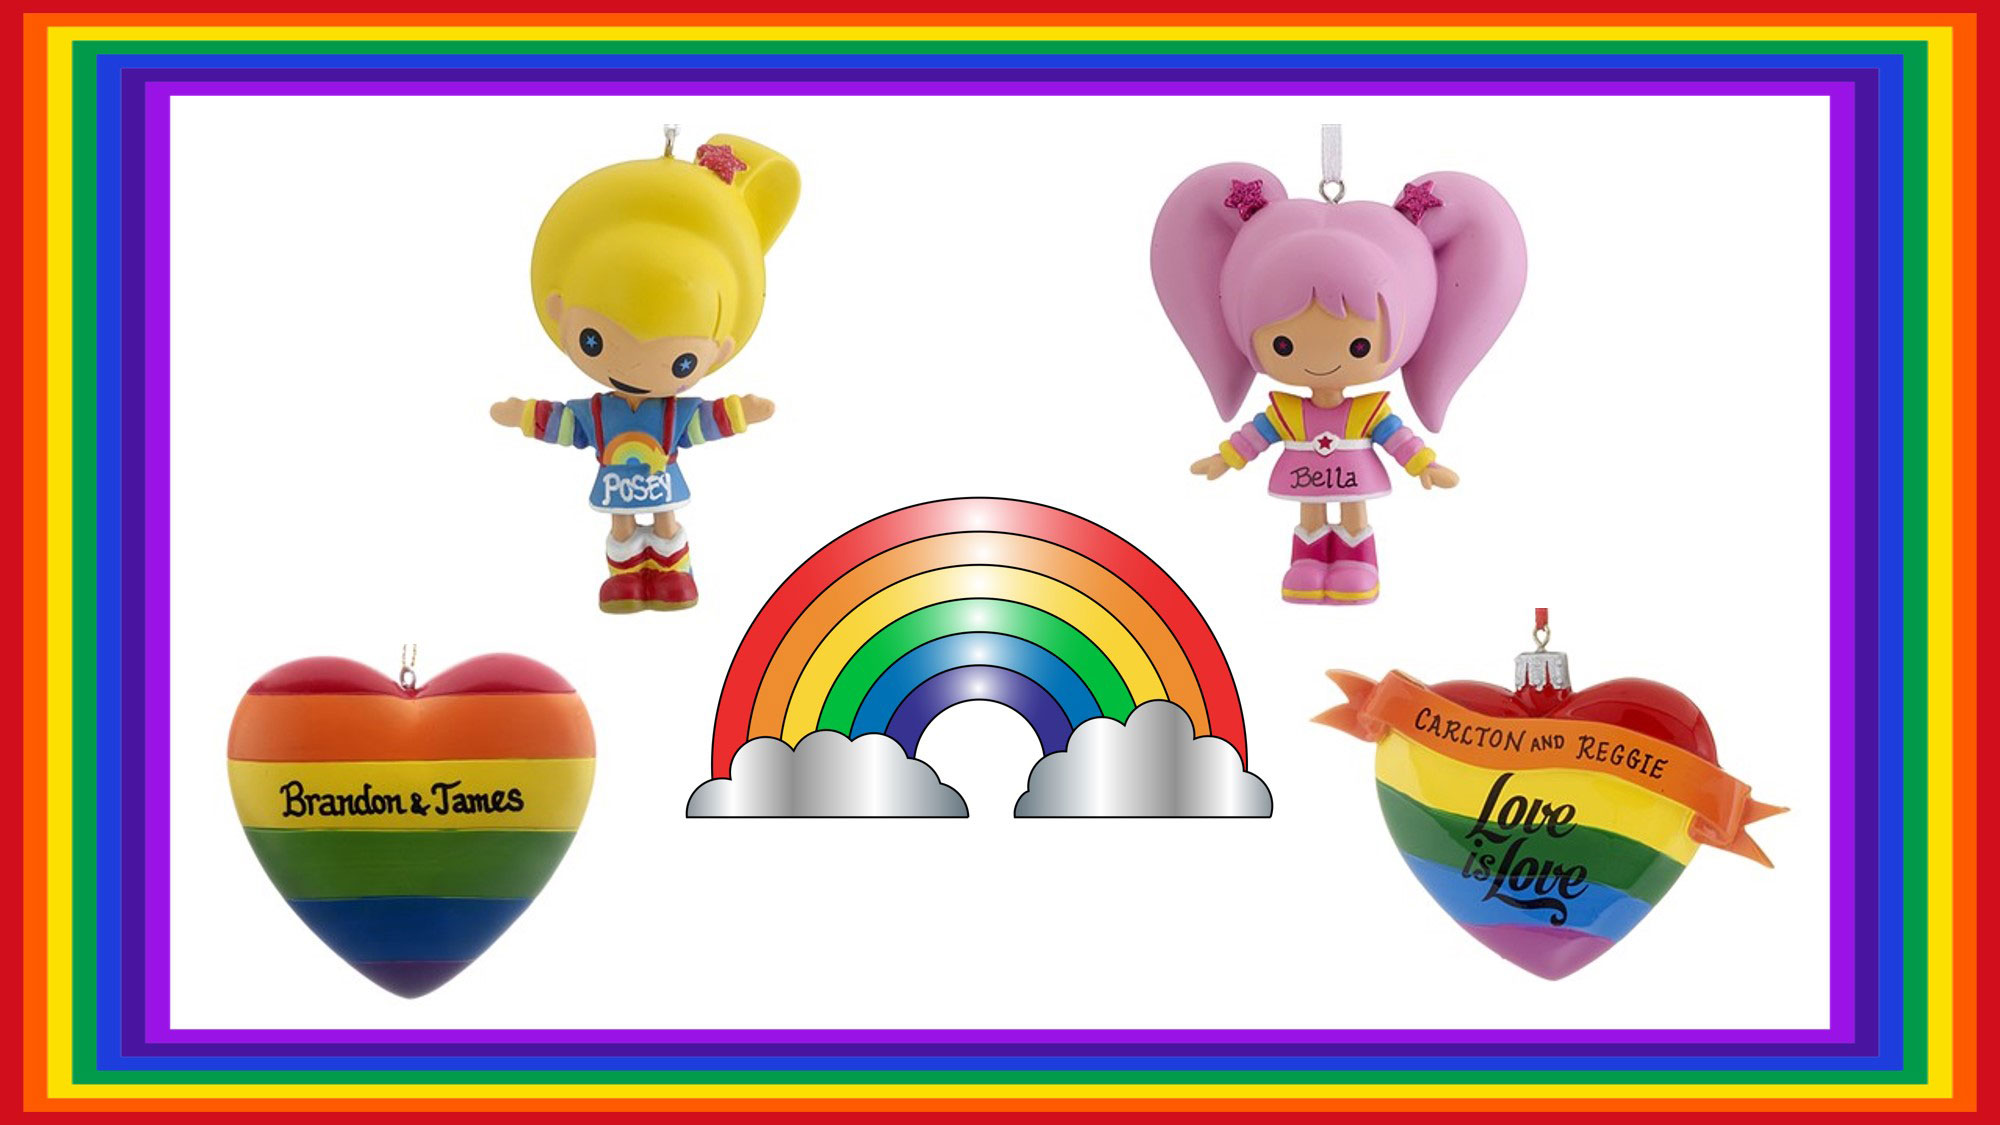 Check out our personalized rainbow ornaments that are guaranteed to make you smile! | OrnamentShop.com